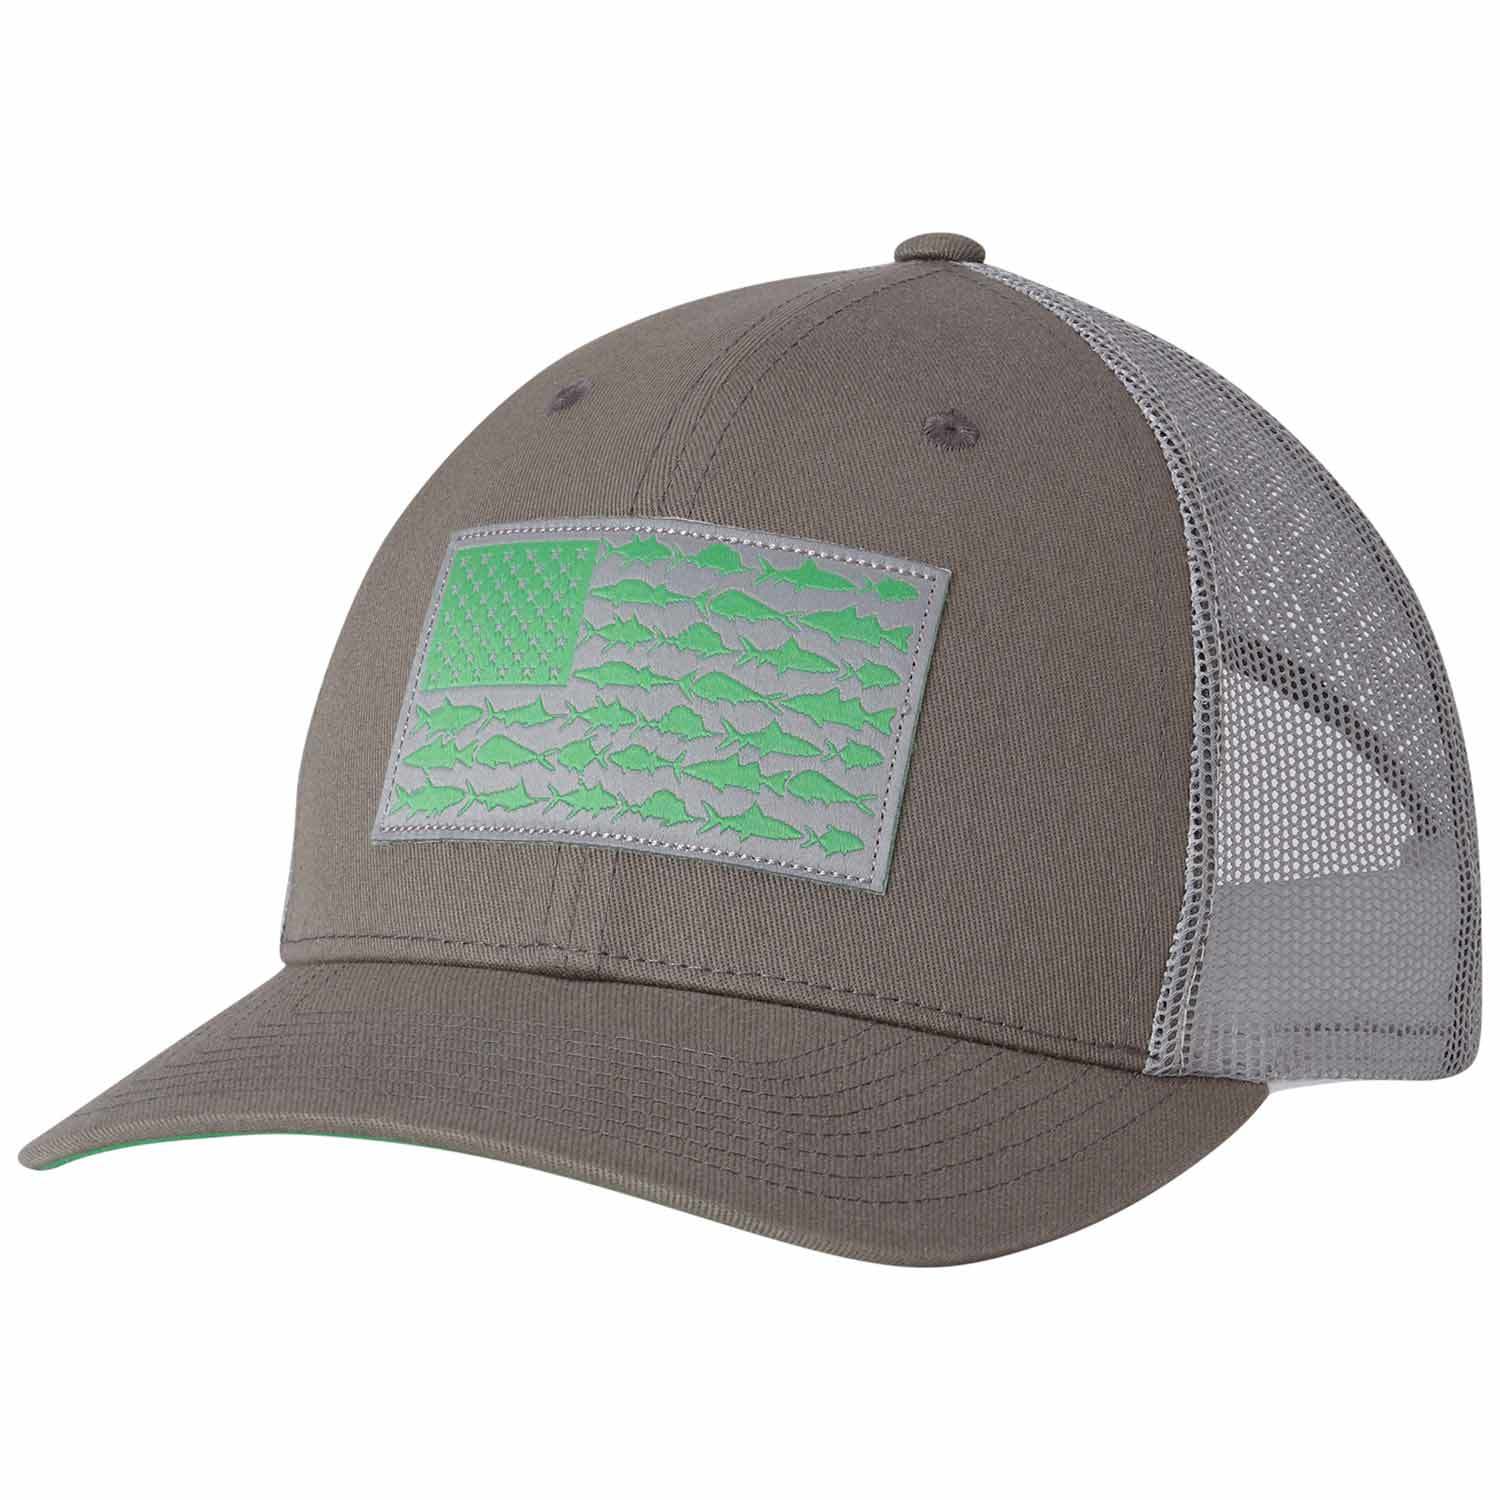 Columbia PFG Mesh Snap Back Fish Flag Hat - Gray - One Size Fits